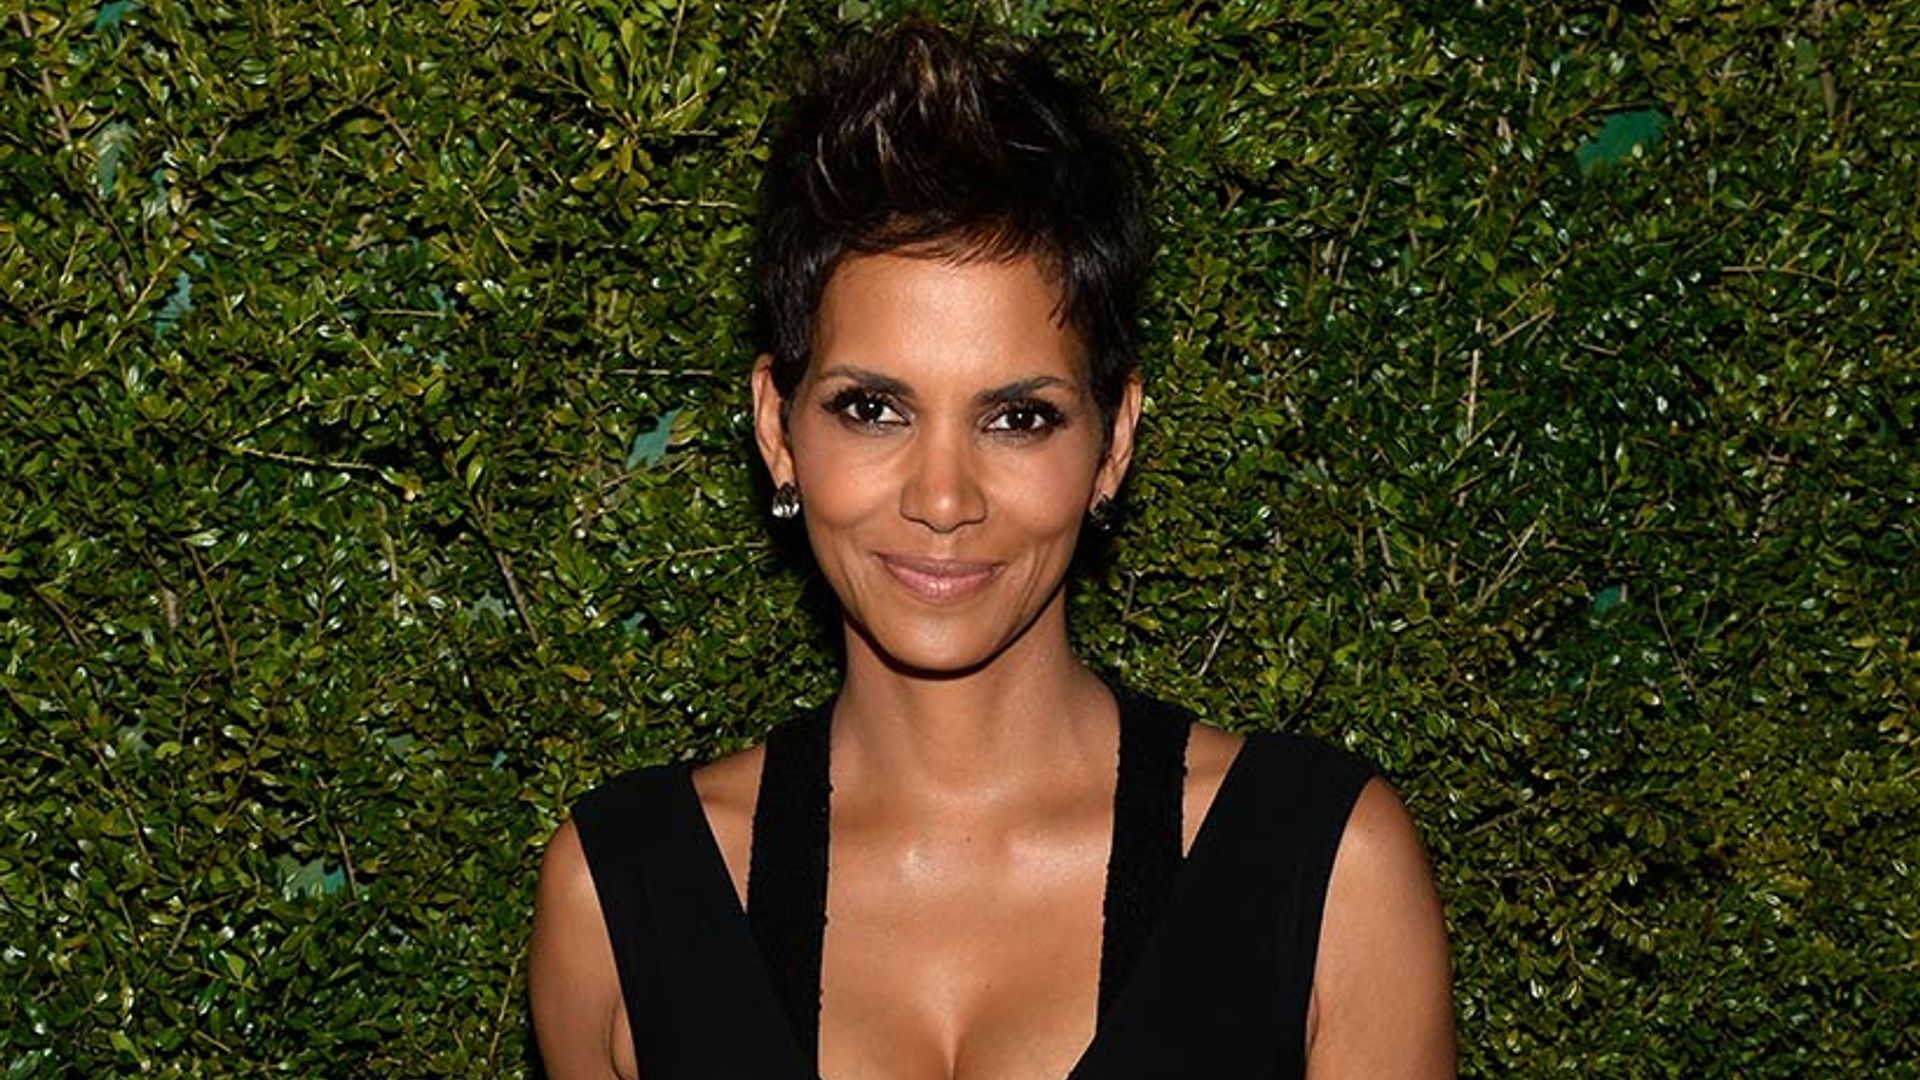 Halle Berry reveals she once lived in a homeless shelter